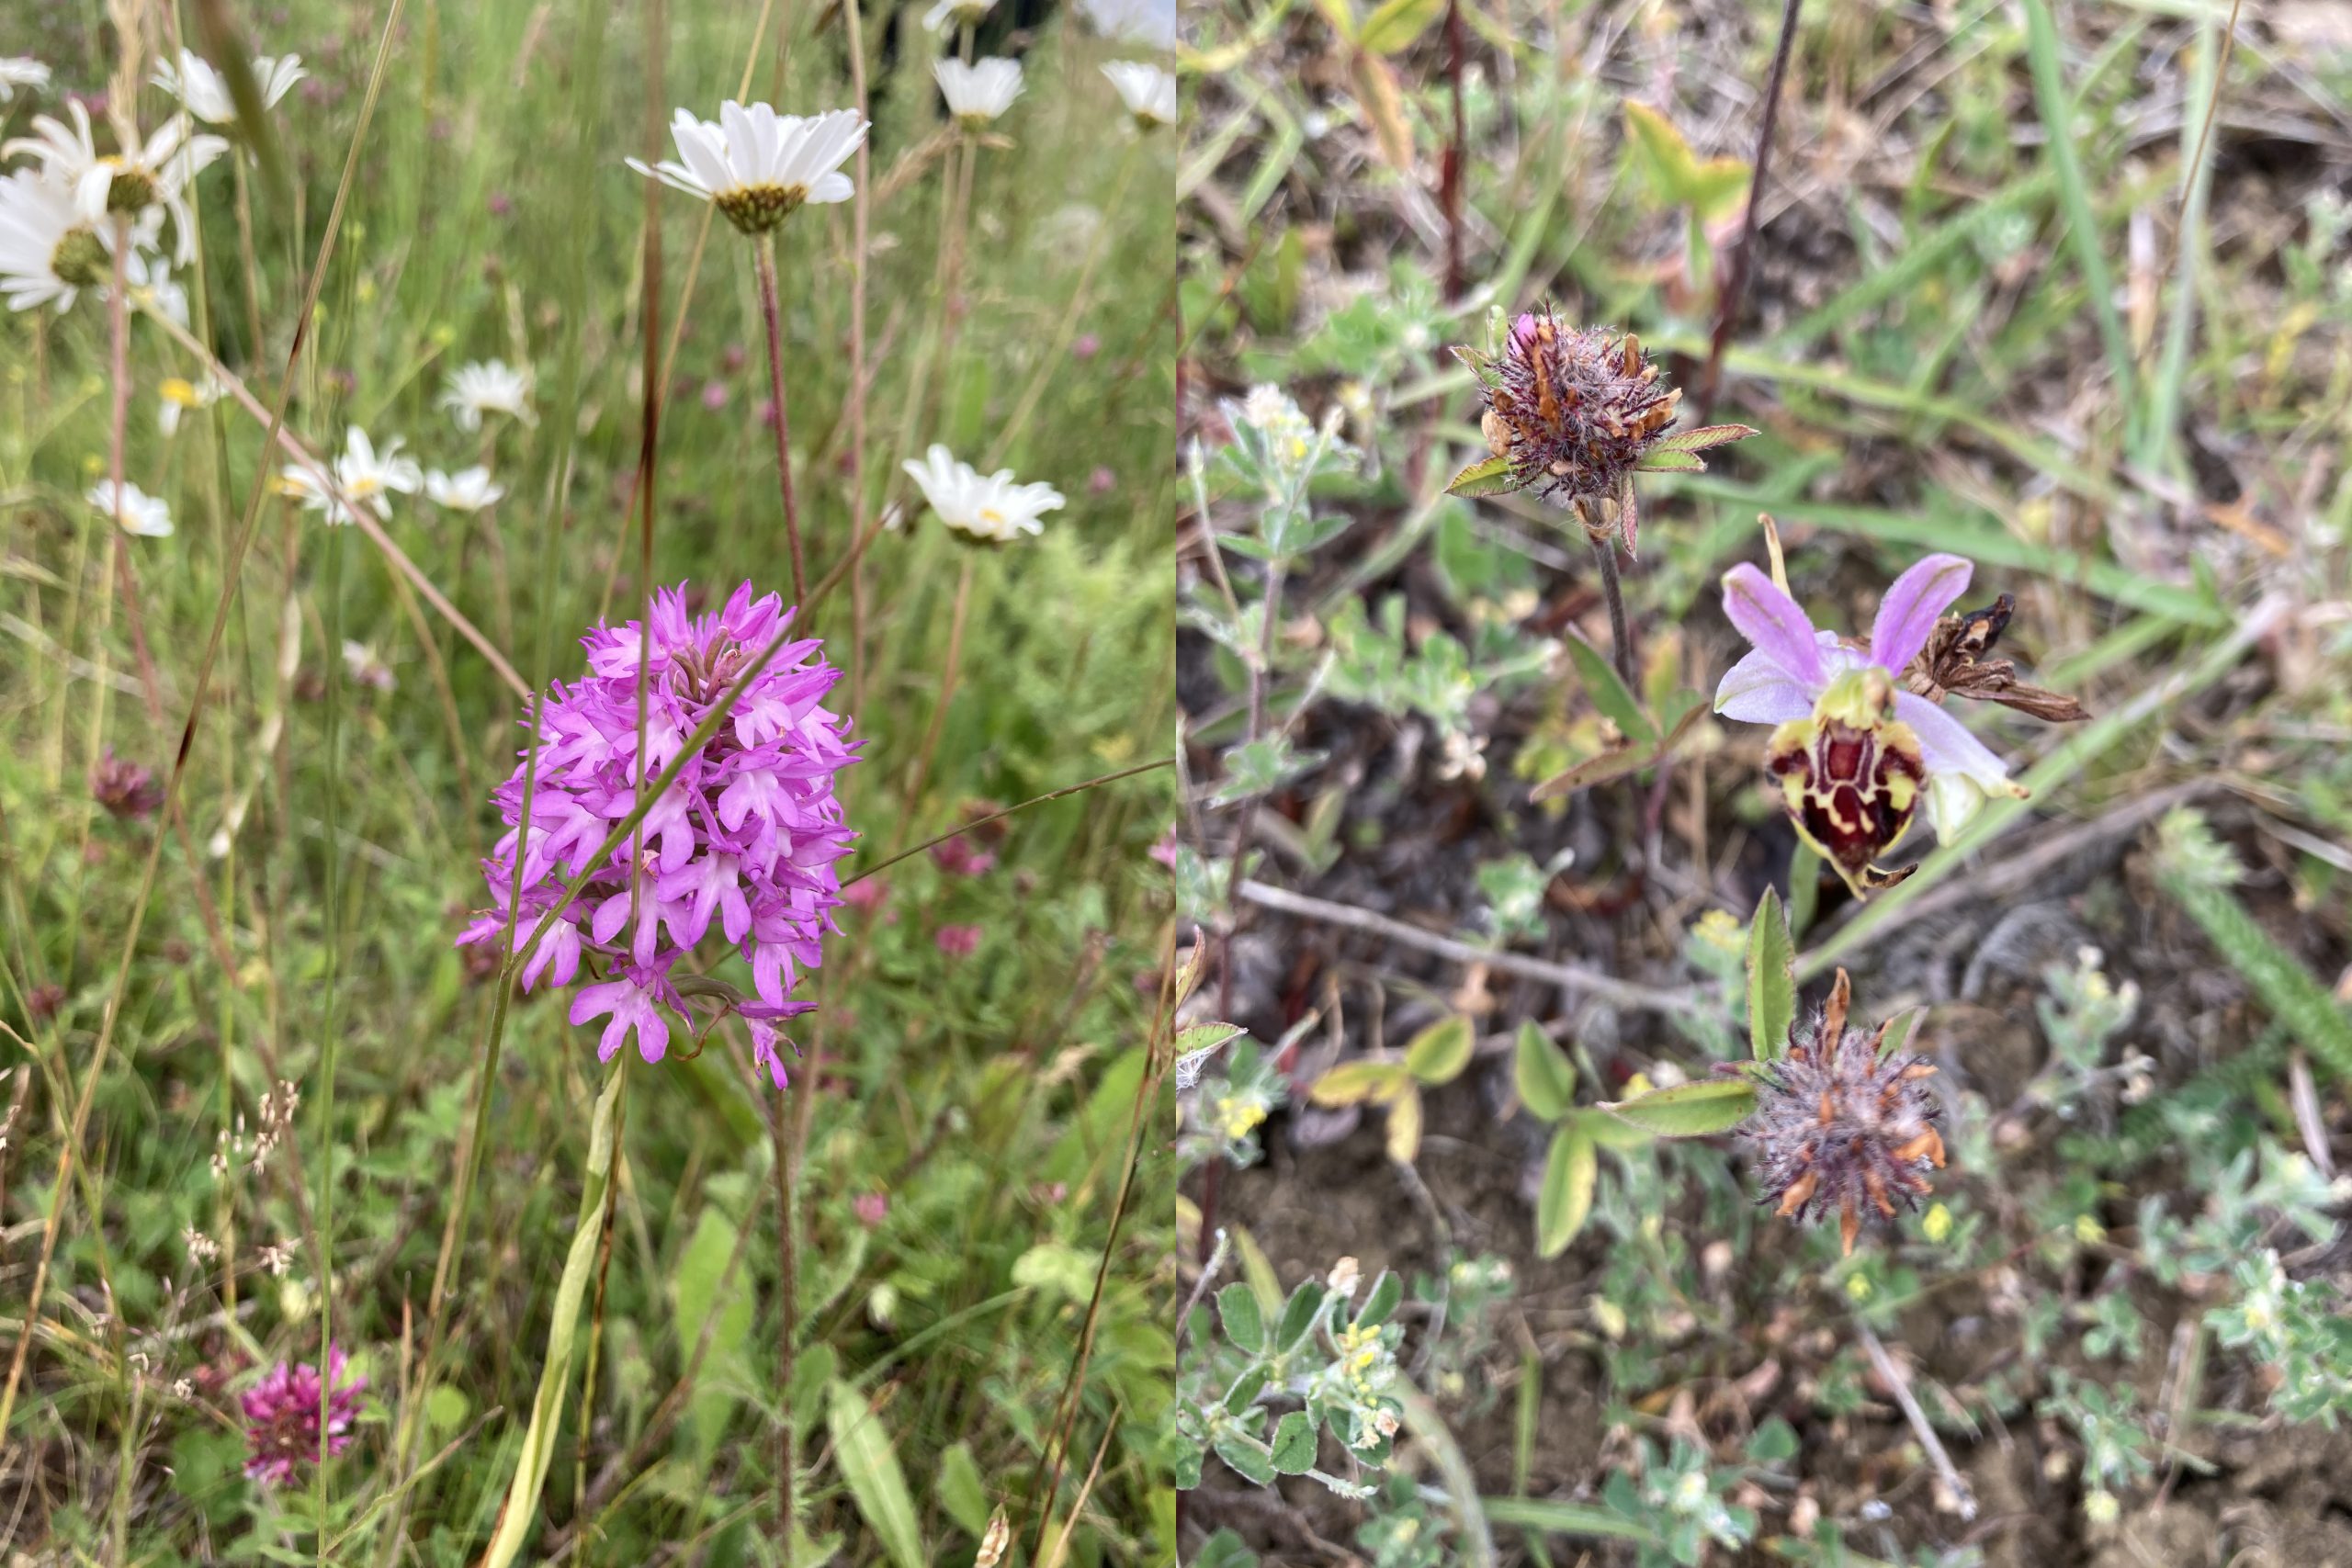 A variety of orchids such as the Pyramidal Orchid (Anacamptis pyramidalis) and the Bee Orchid (Ophrys apifera) are now thriving thanks to the work of the Trust and their collaboration with Cirencester Town Council. 